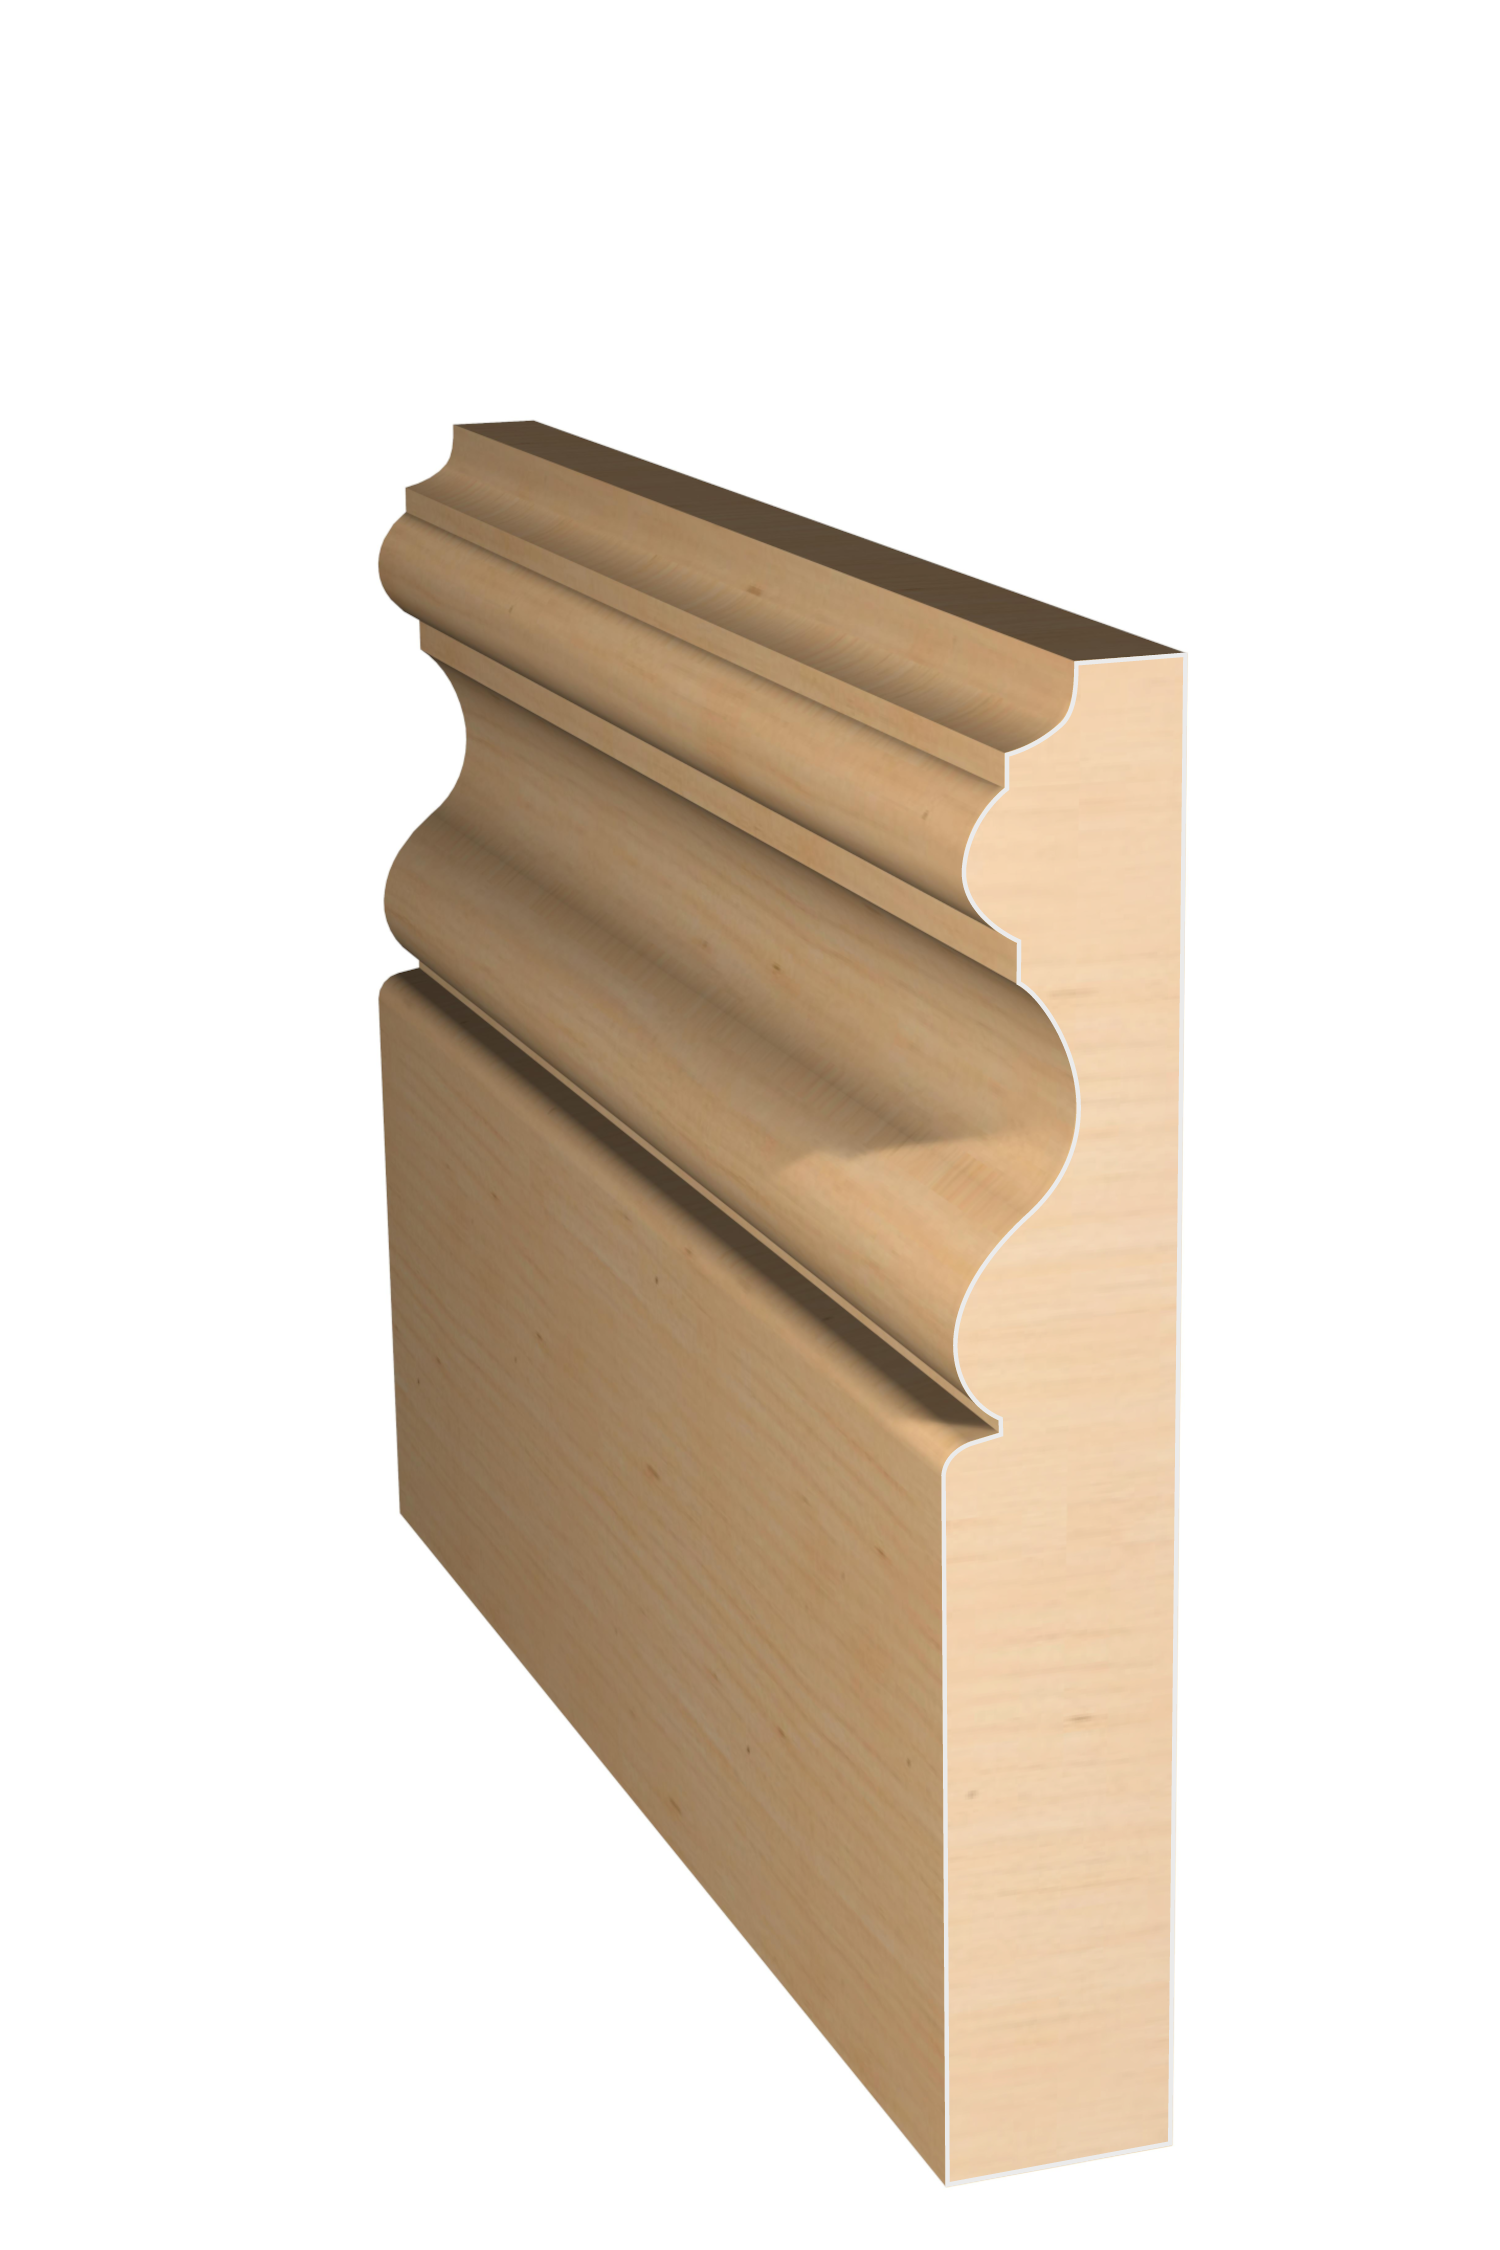 Three dimensional rendering of custom base wood molding BAPL41410 made by Public Lumber Company in Detroit.